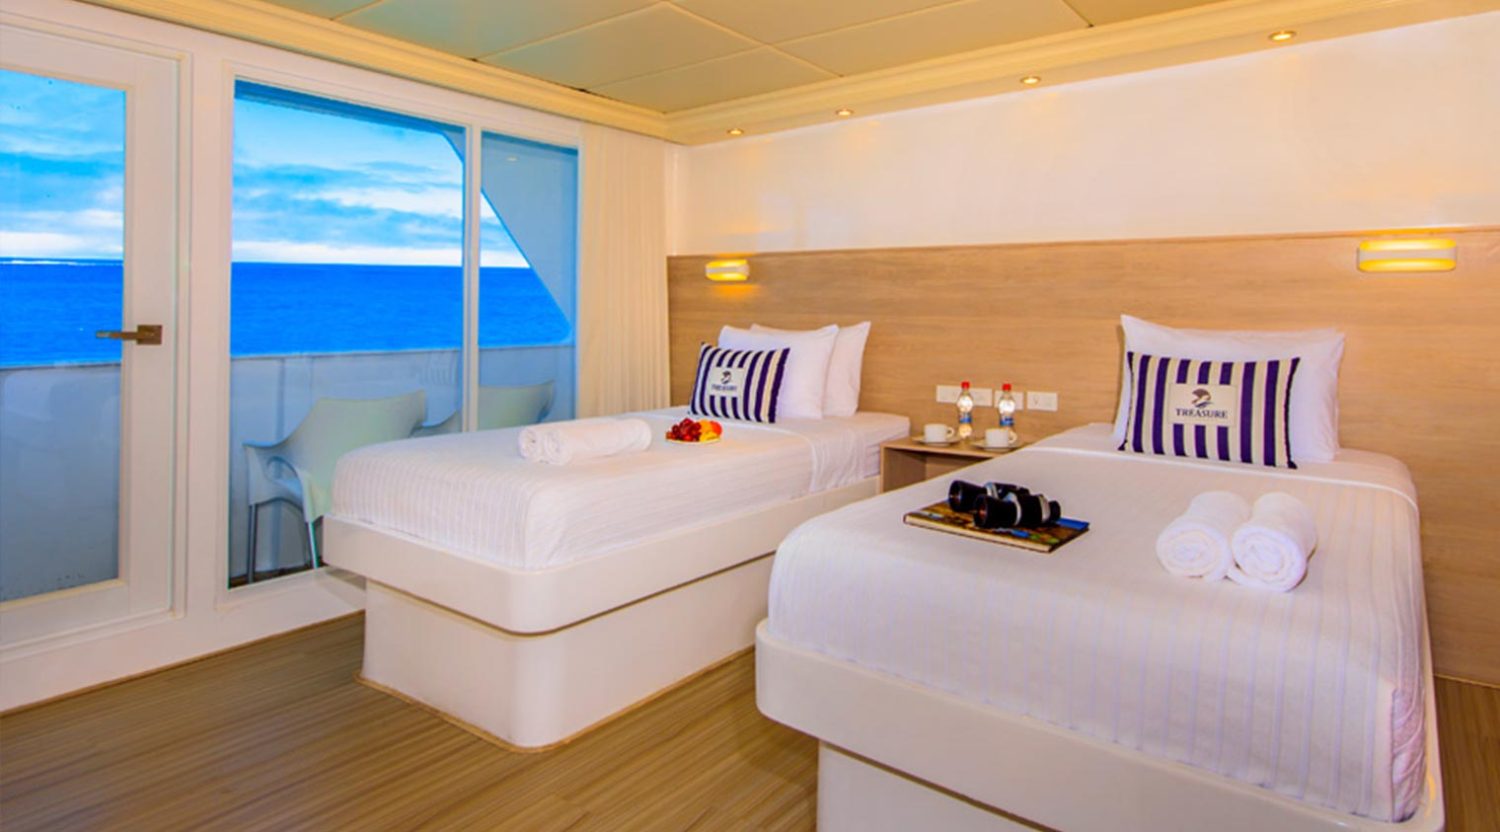 double bed bedroom of treasure of galapagos yacht of galapagos islands